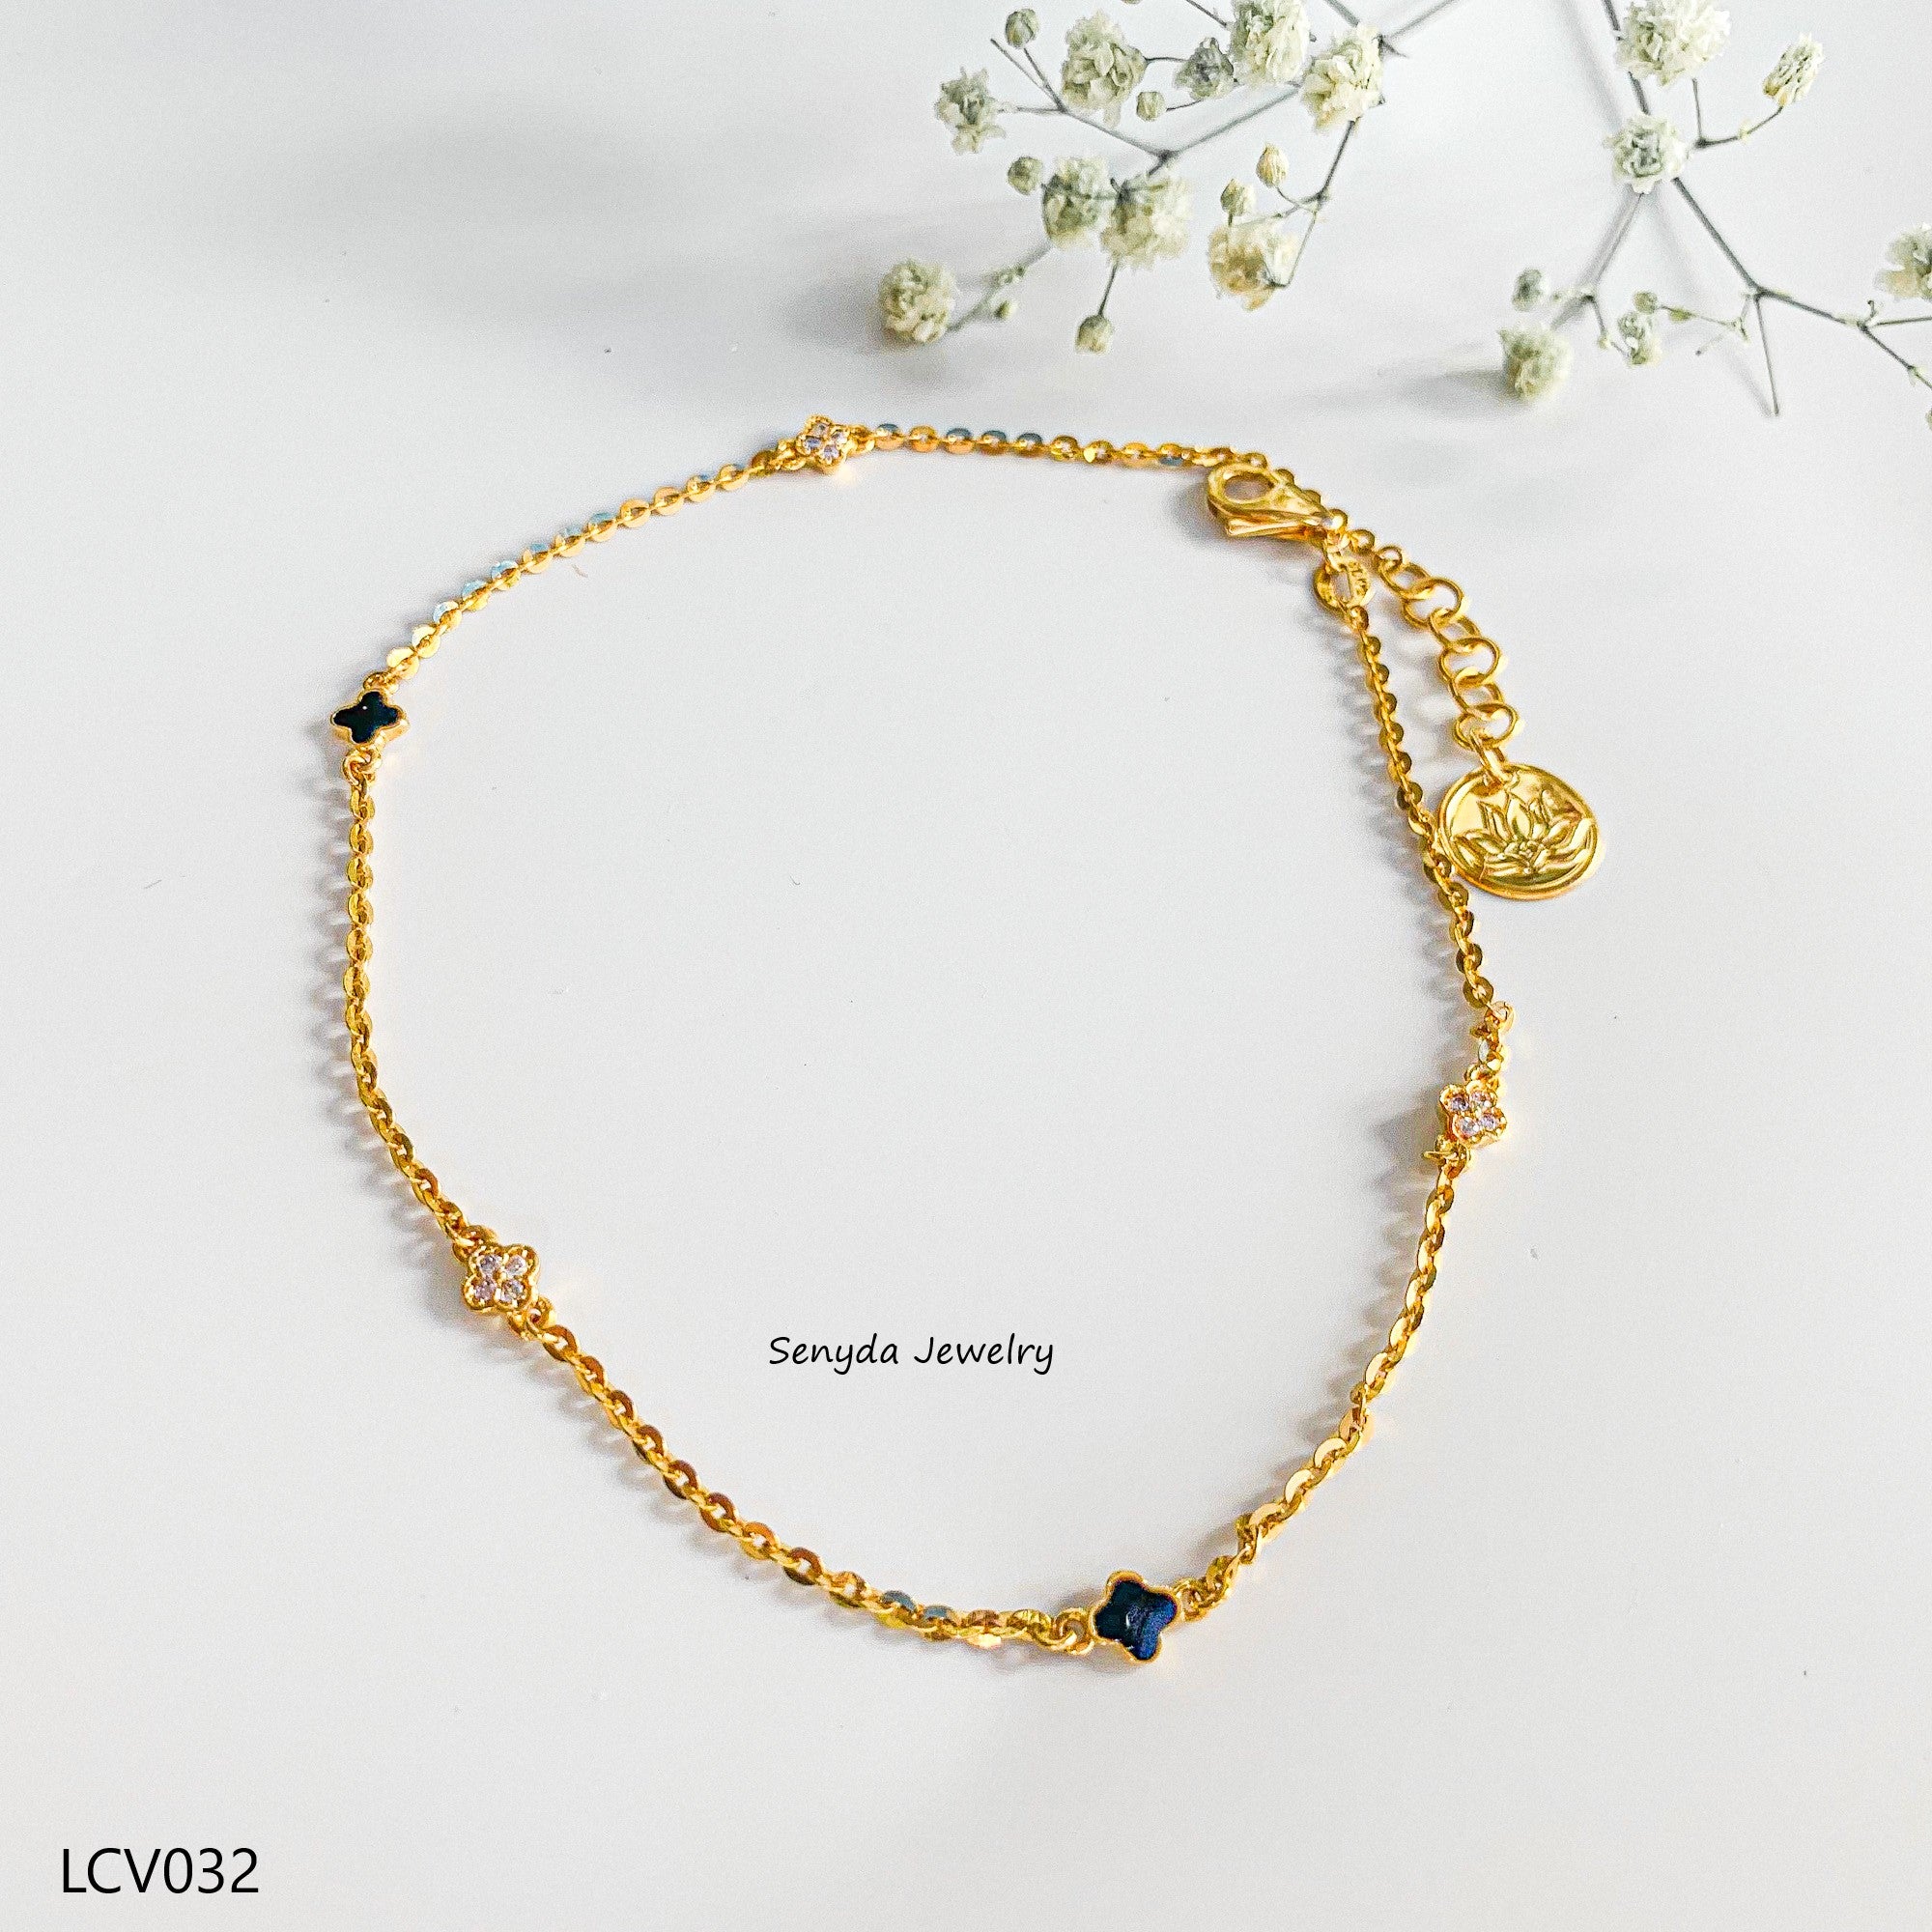 The Senyda's black petal anklet with stone-studded 4-petal flowers and lotus tail